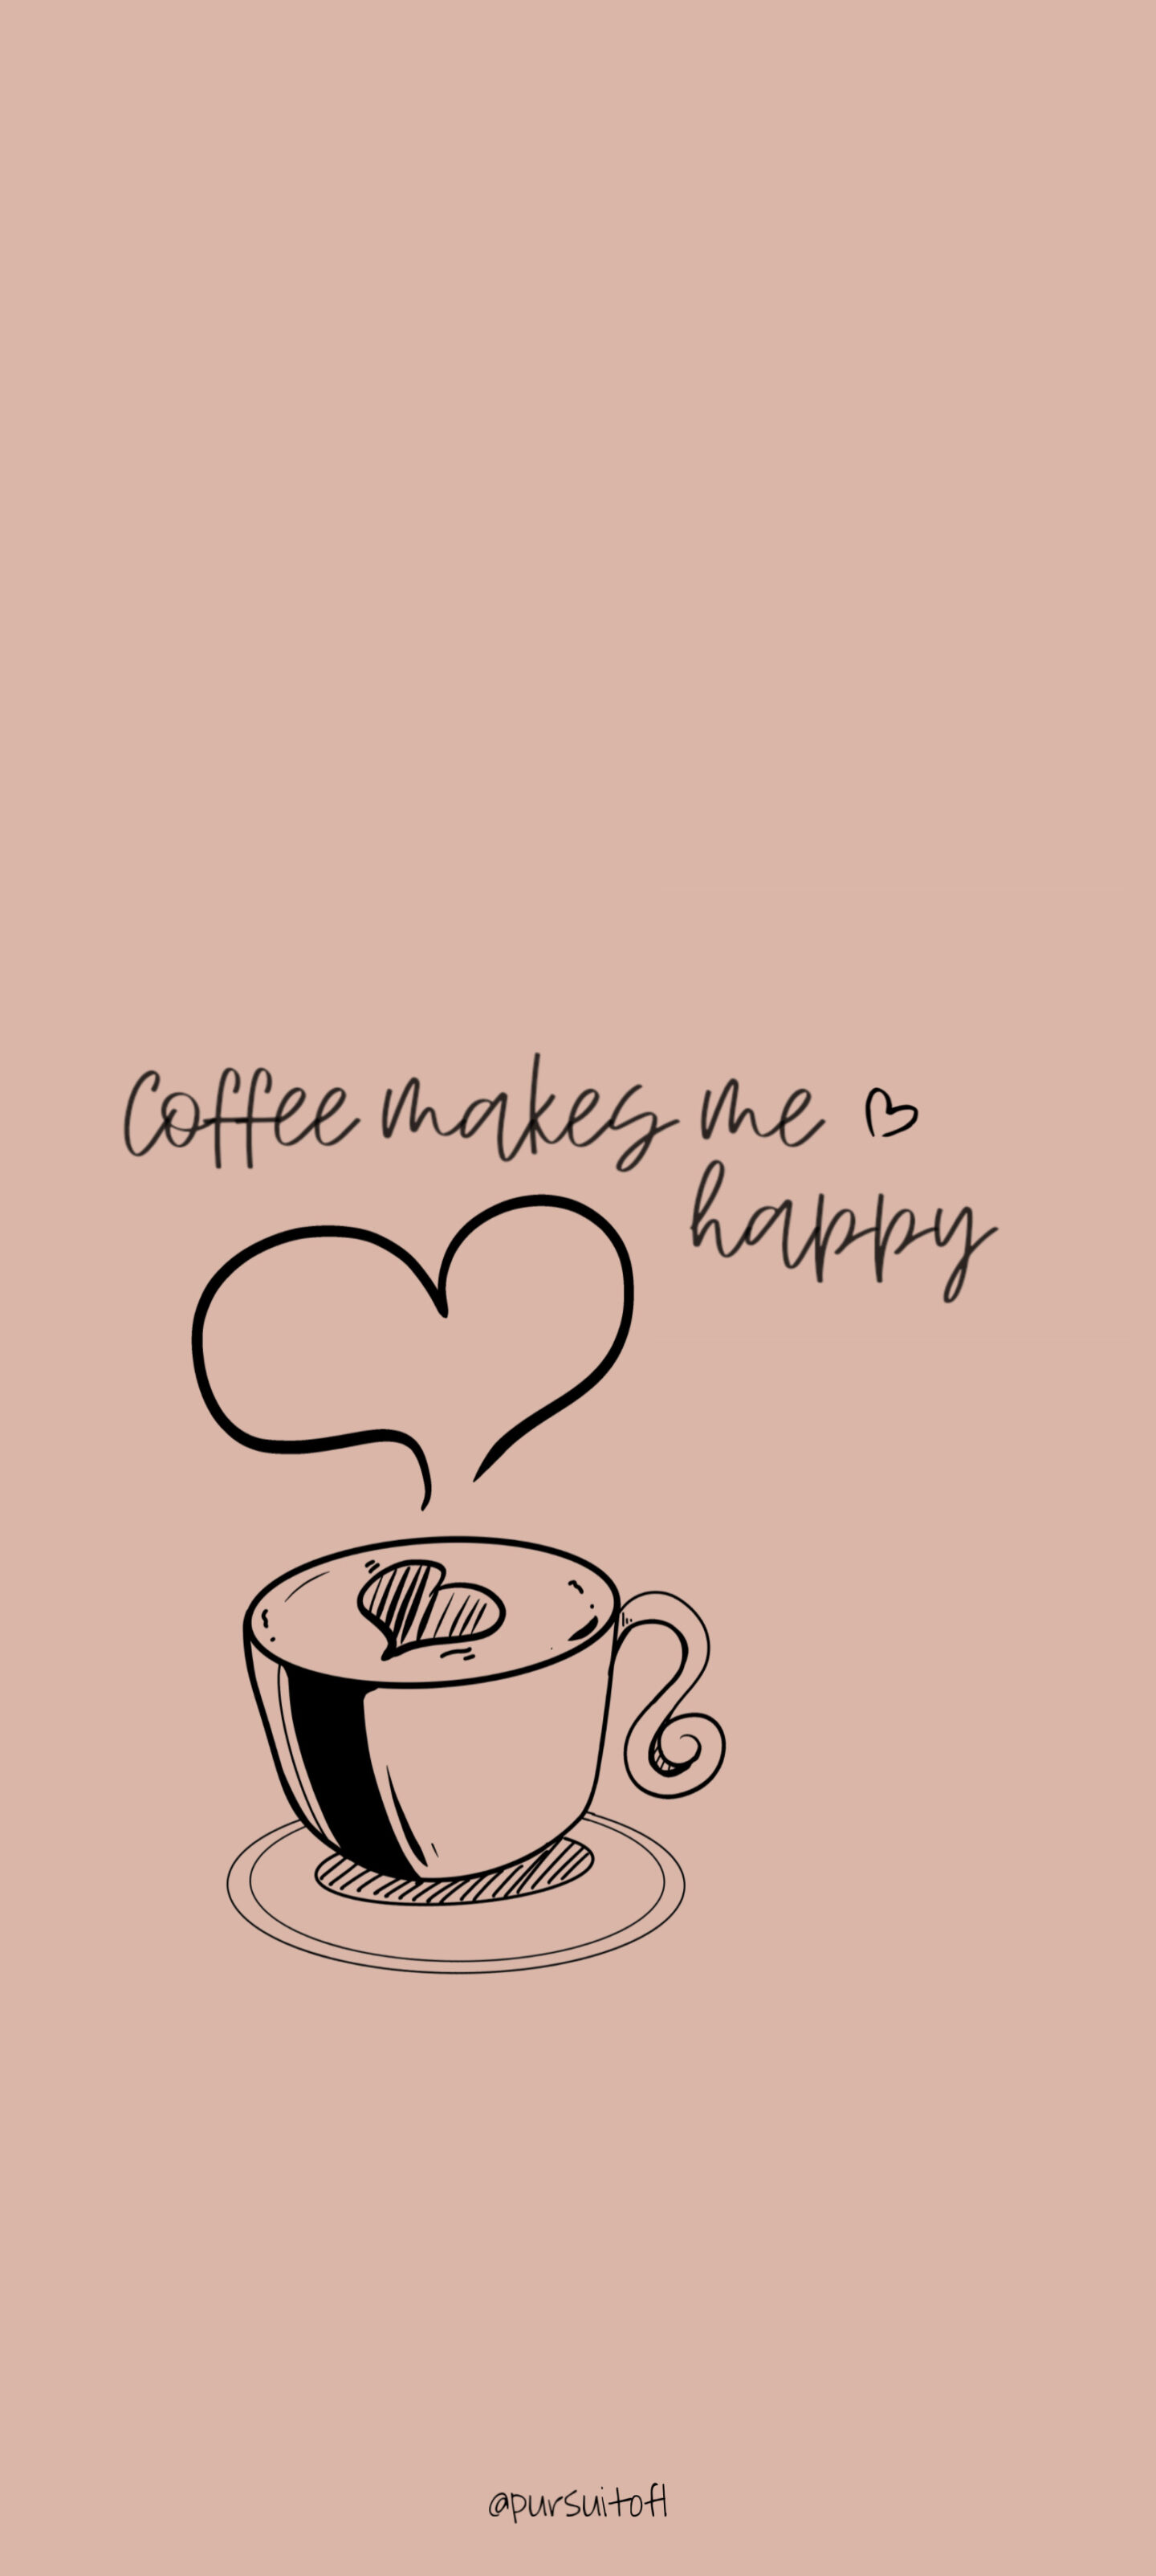 Tan Phone Wallpaper with Coffee Makes Me Happy Text and Cup of Coffee Illustration with Steam Heart